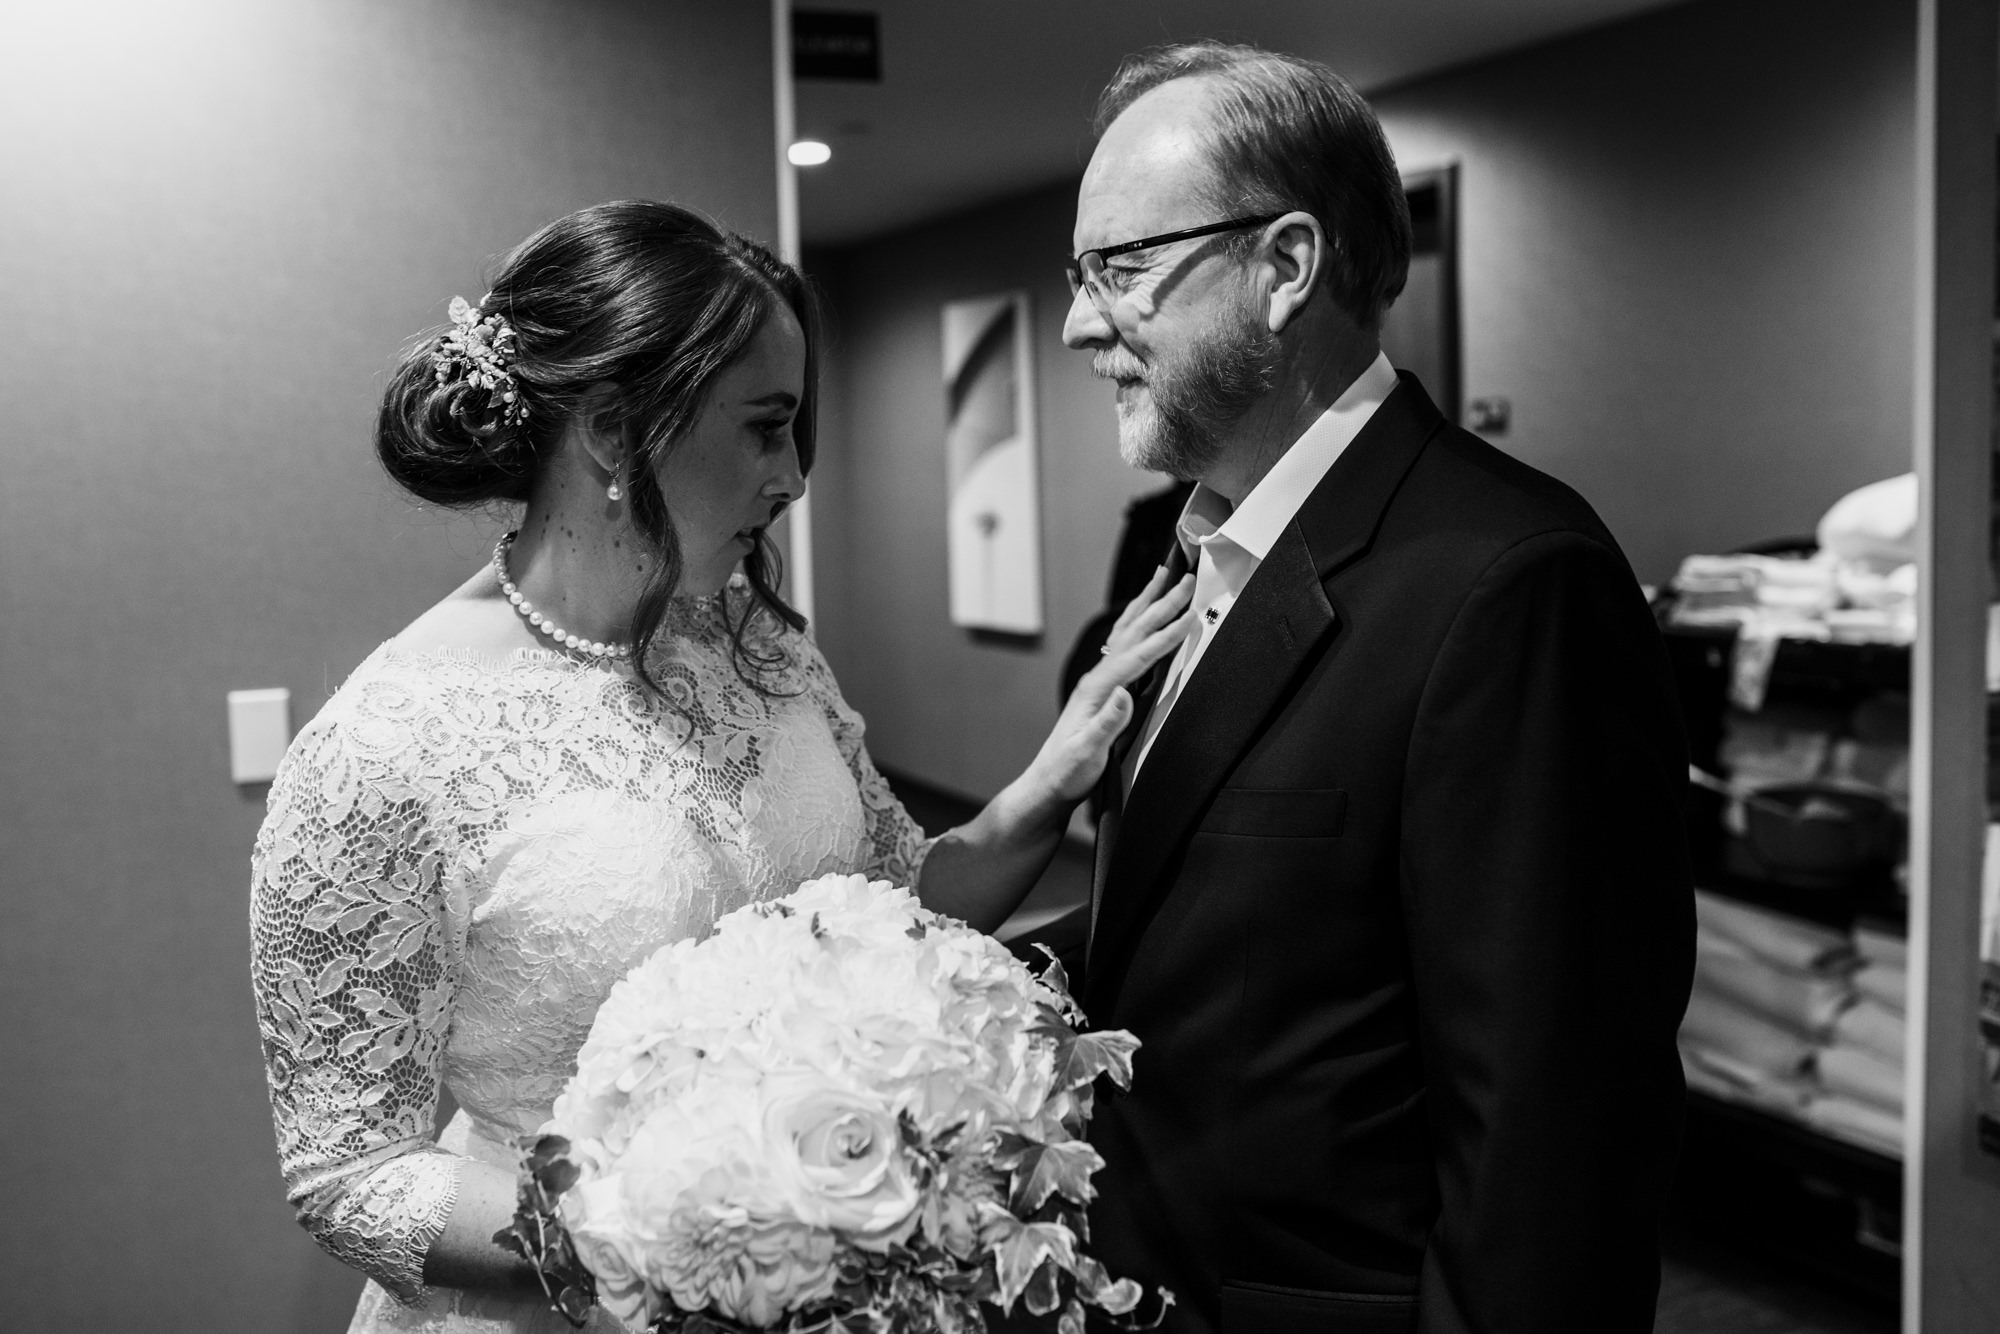 Lauren and her dad have a private moment before First Look.